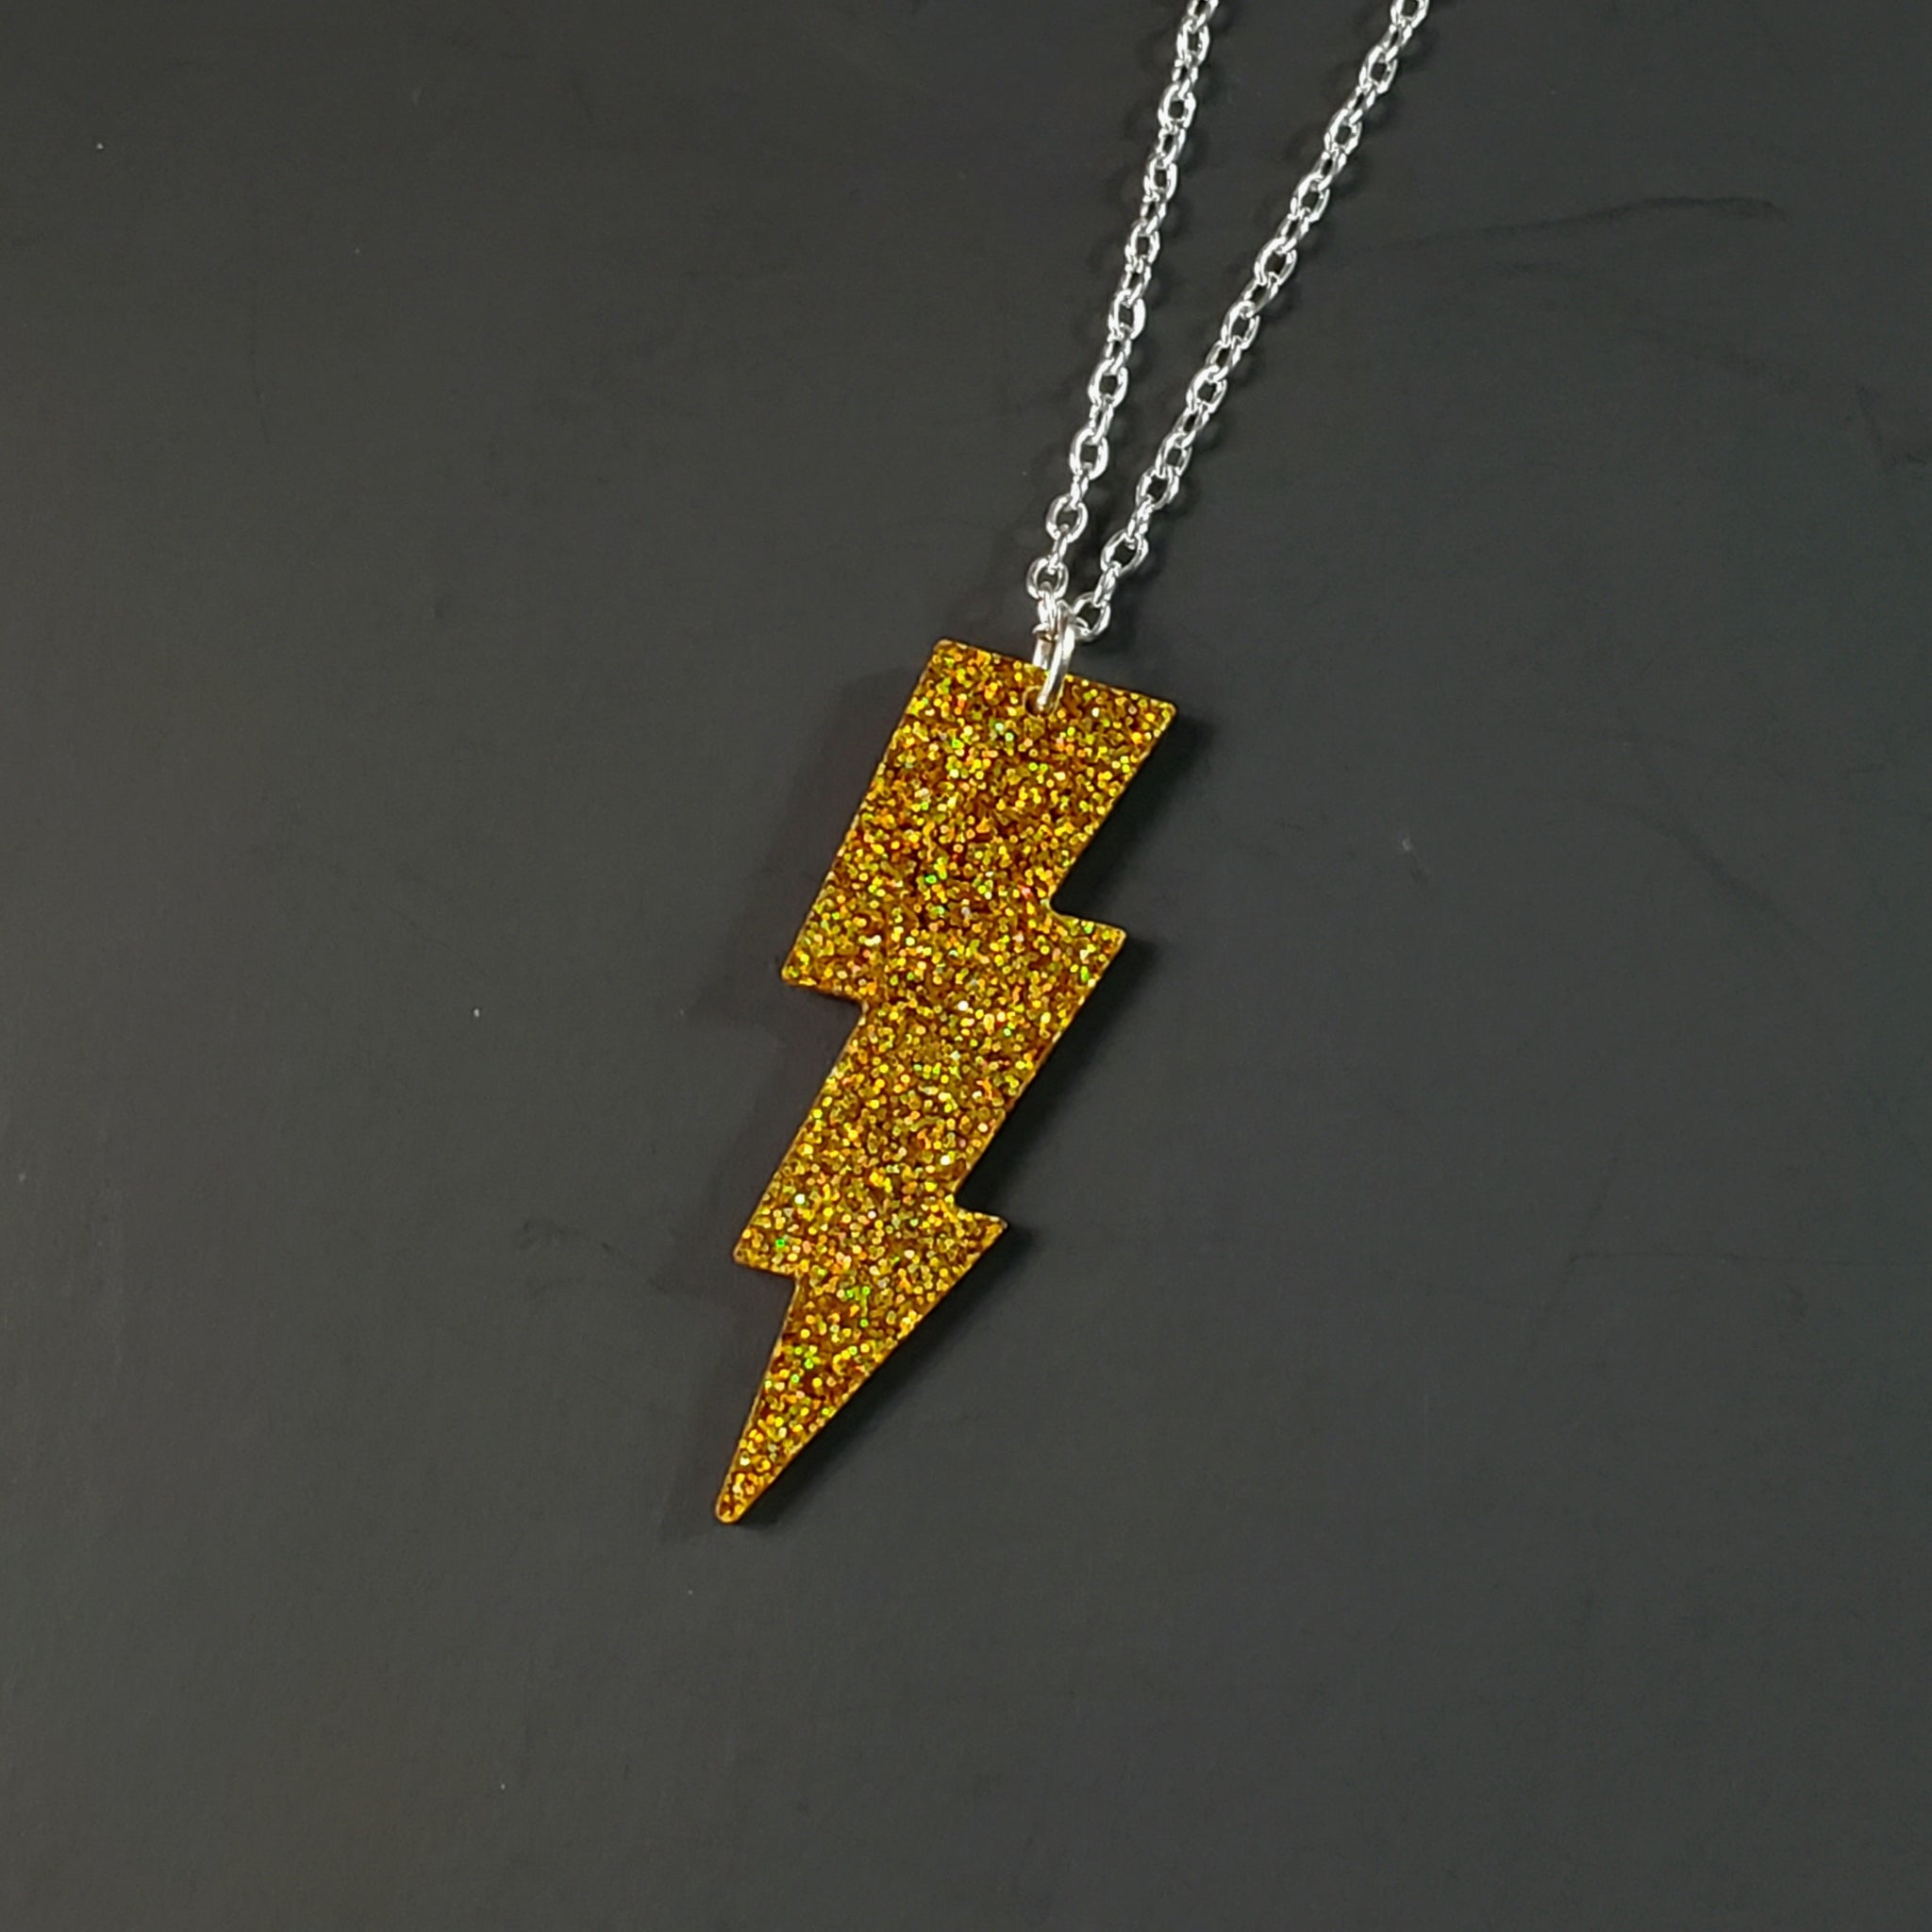 sparkly gold glitter lightning bolt shaped acrylic resin pendant attached to a silver plated curb style chain